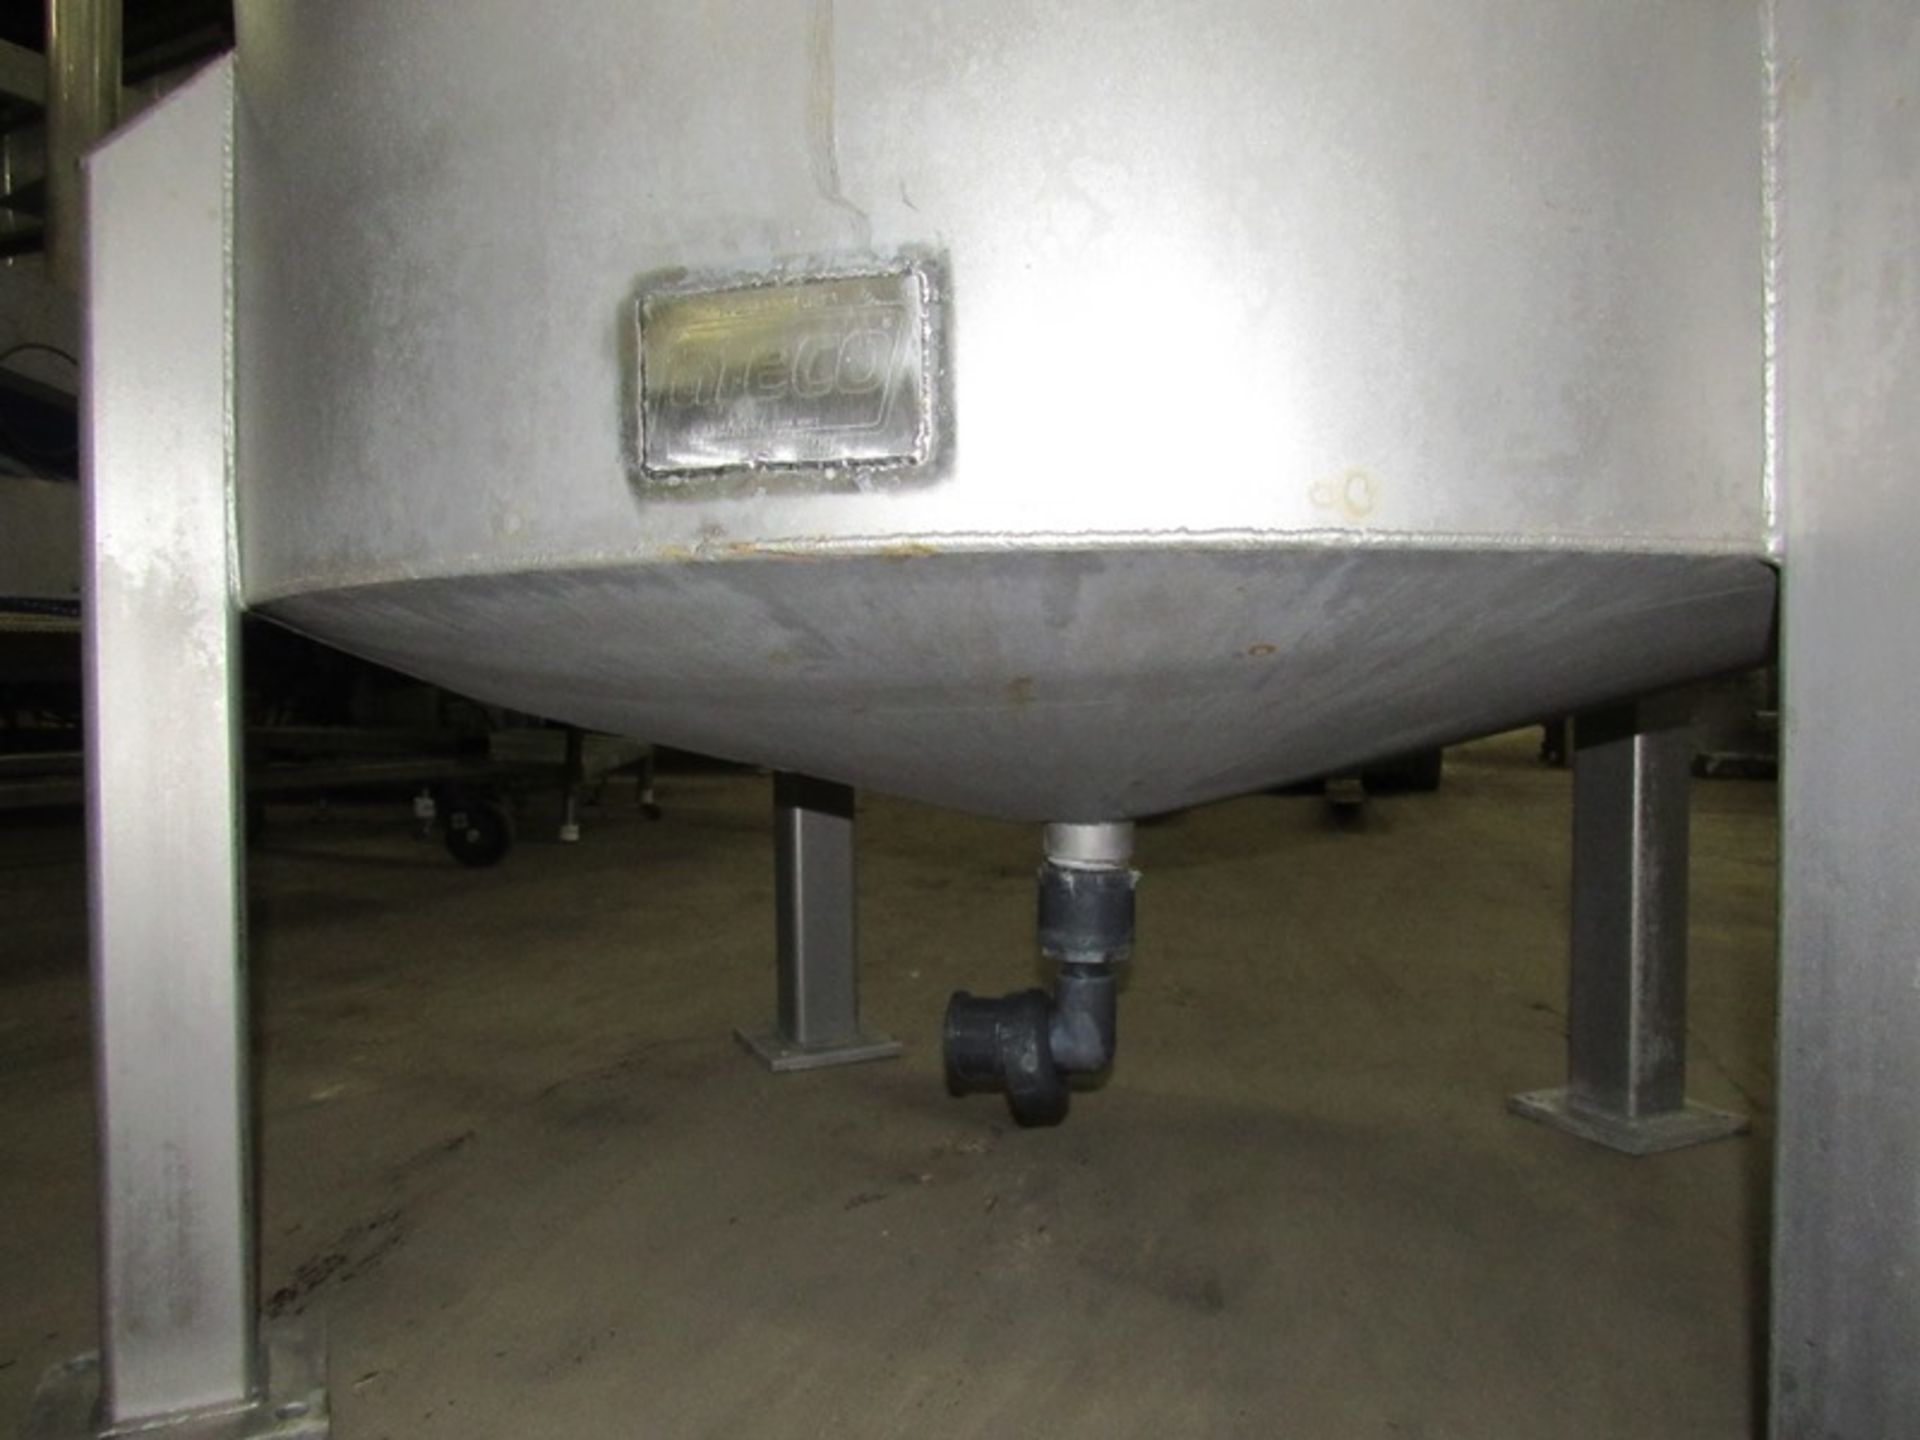 Afeco Stainless Steel Single Tank with solid lid, 44" dia. X 60" deep cone bottom, 80" tall overall, - Image 2 of 4